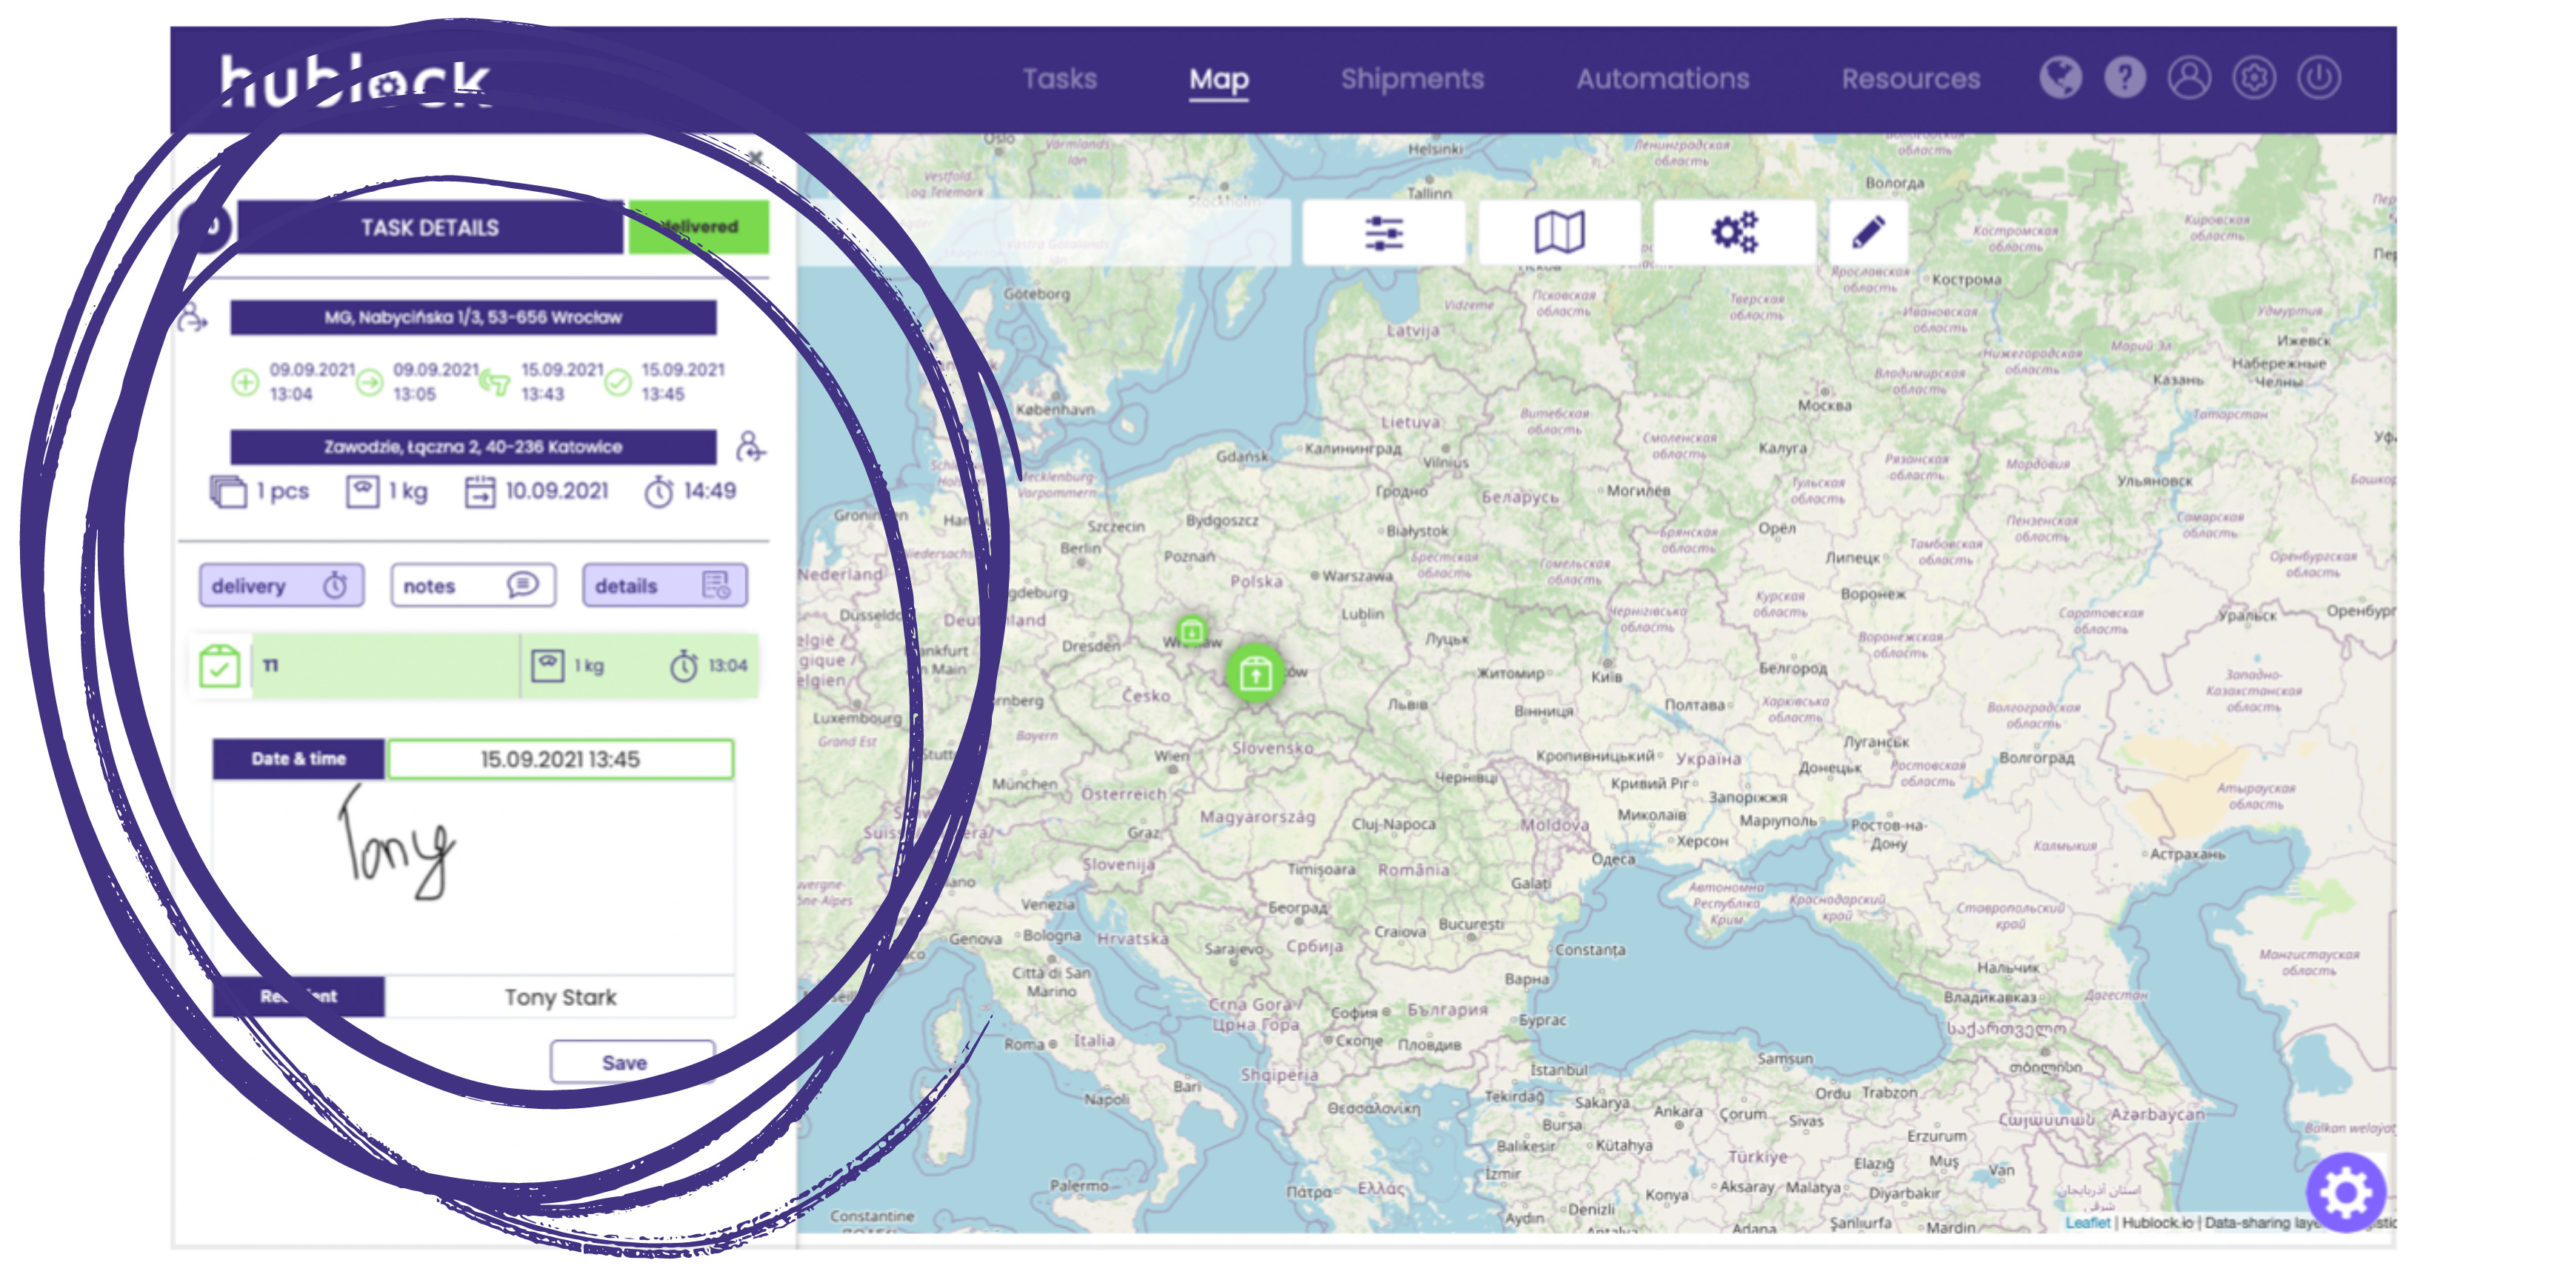 Screenshoot from our platform- side bar and map.